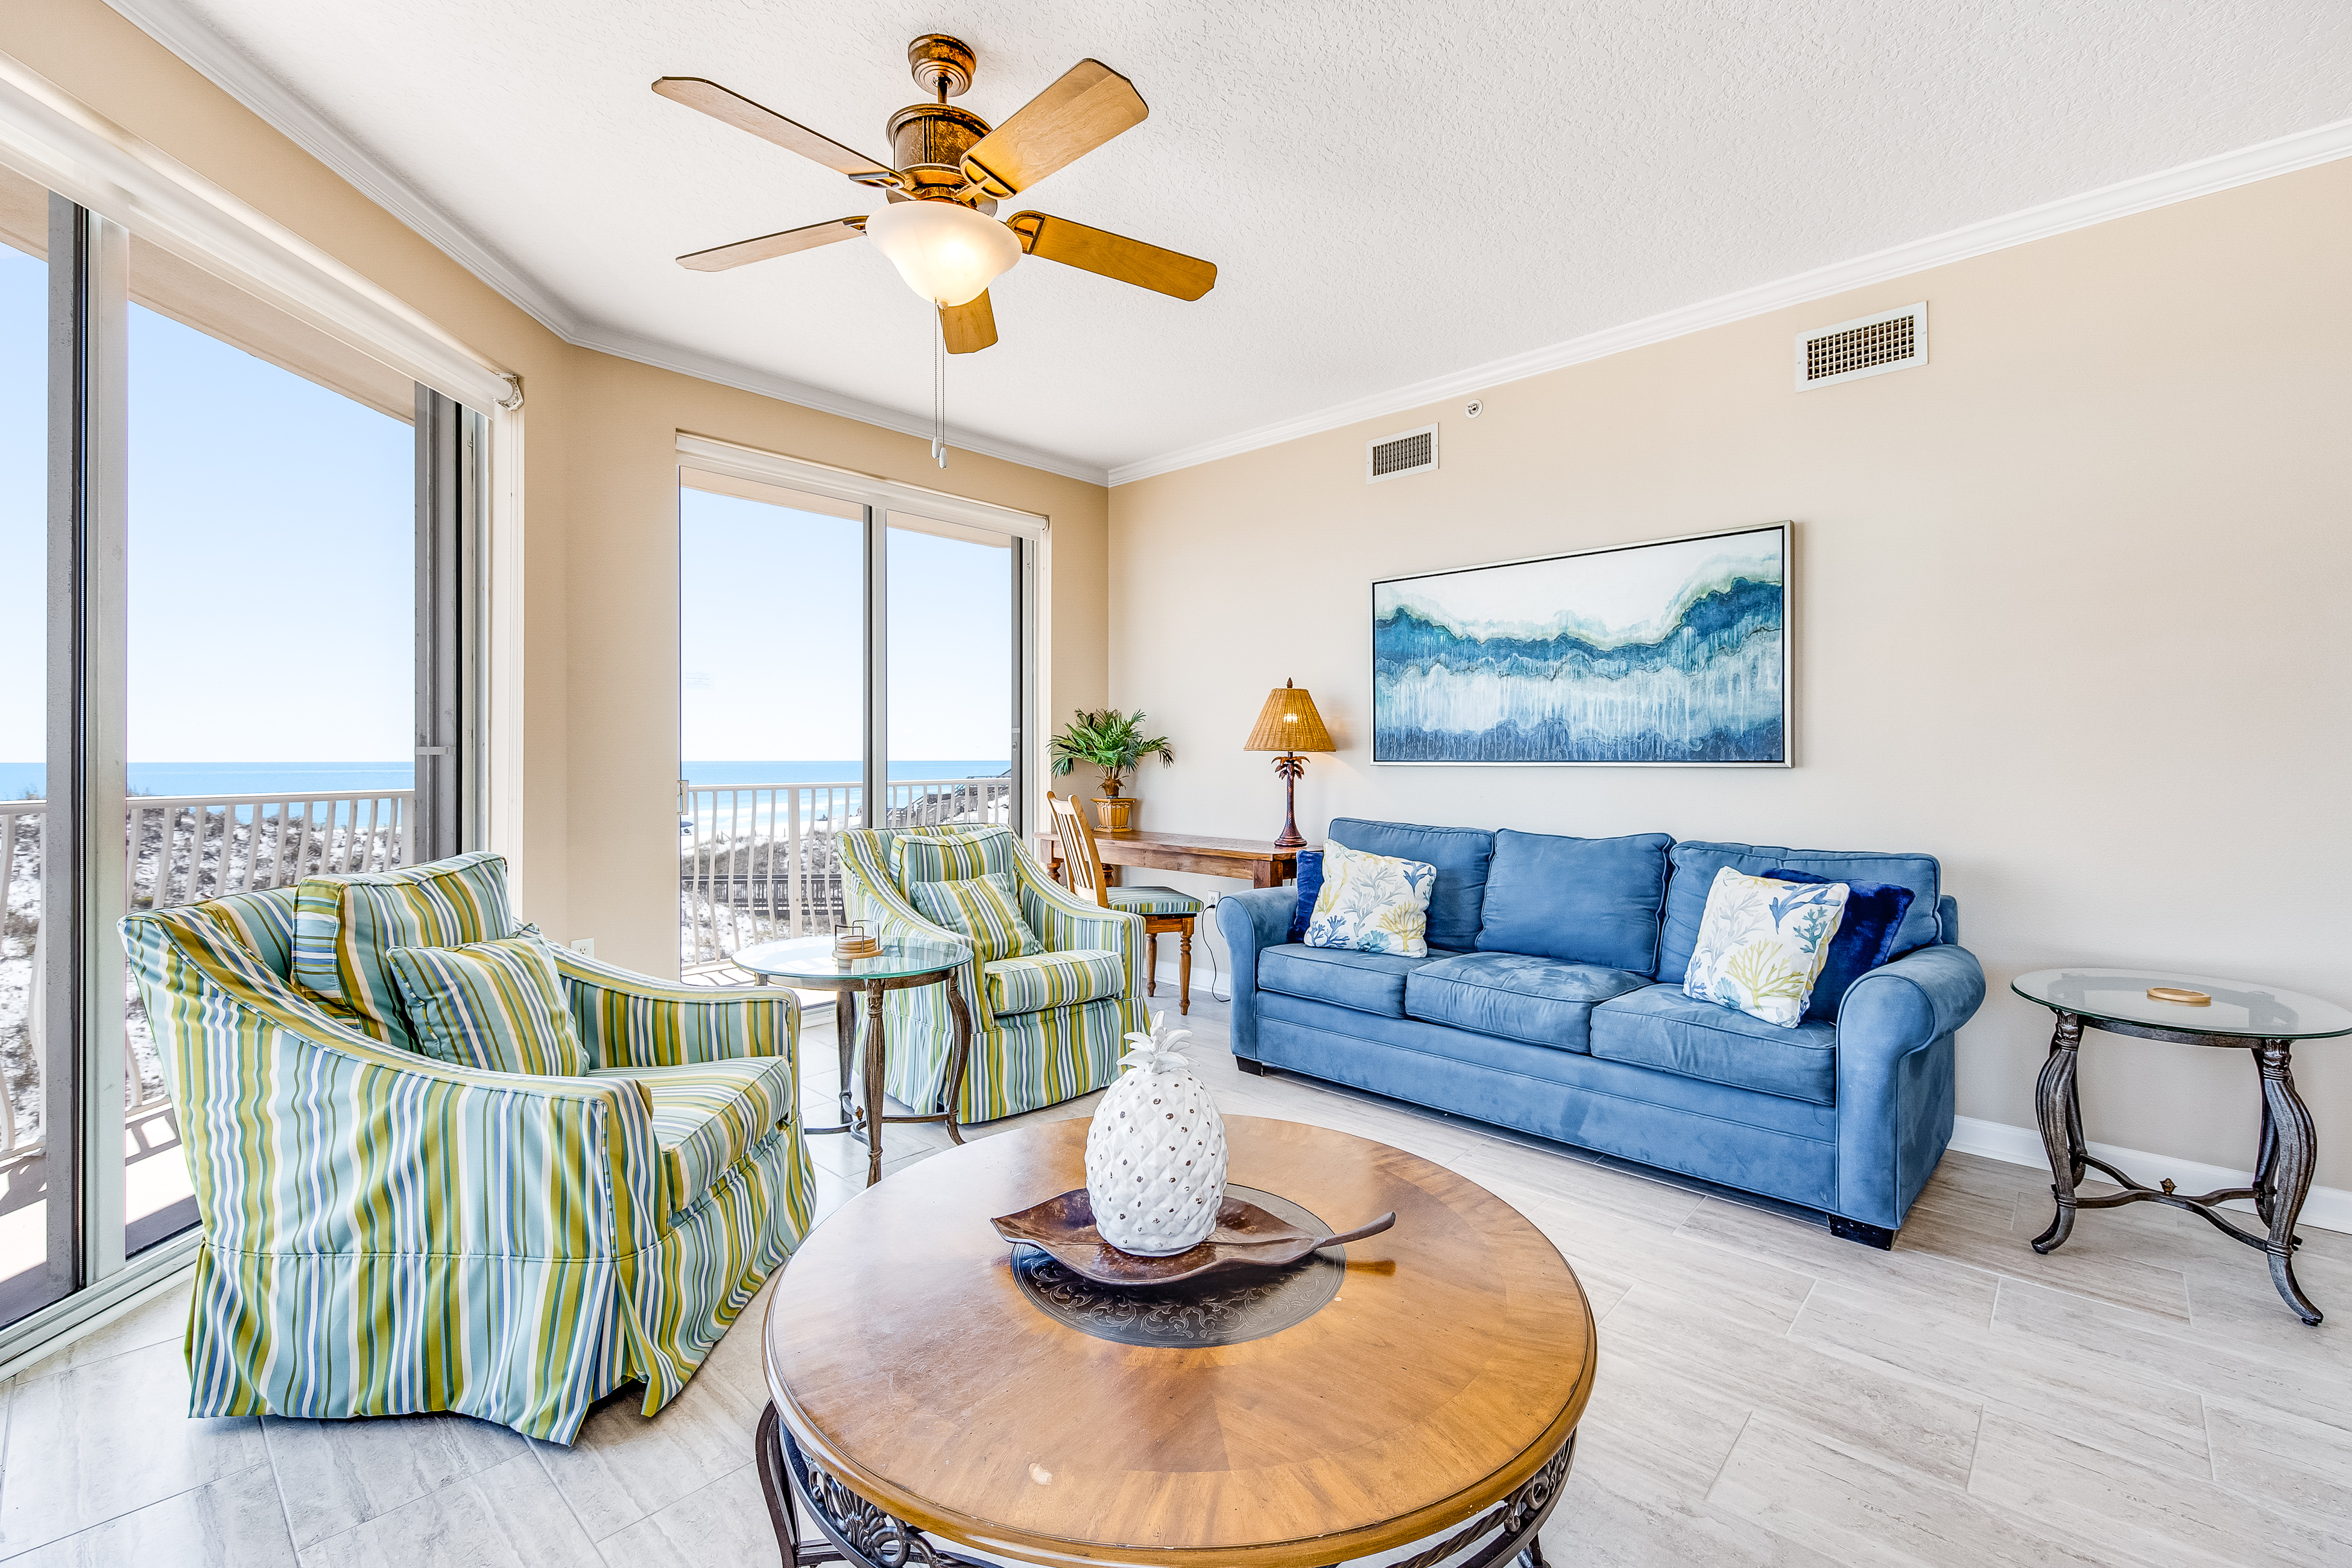 Dunes of Seagrove A210 Condo rental in Dunes of Seagrove in Highway 30-A Florida - #3